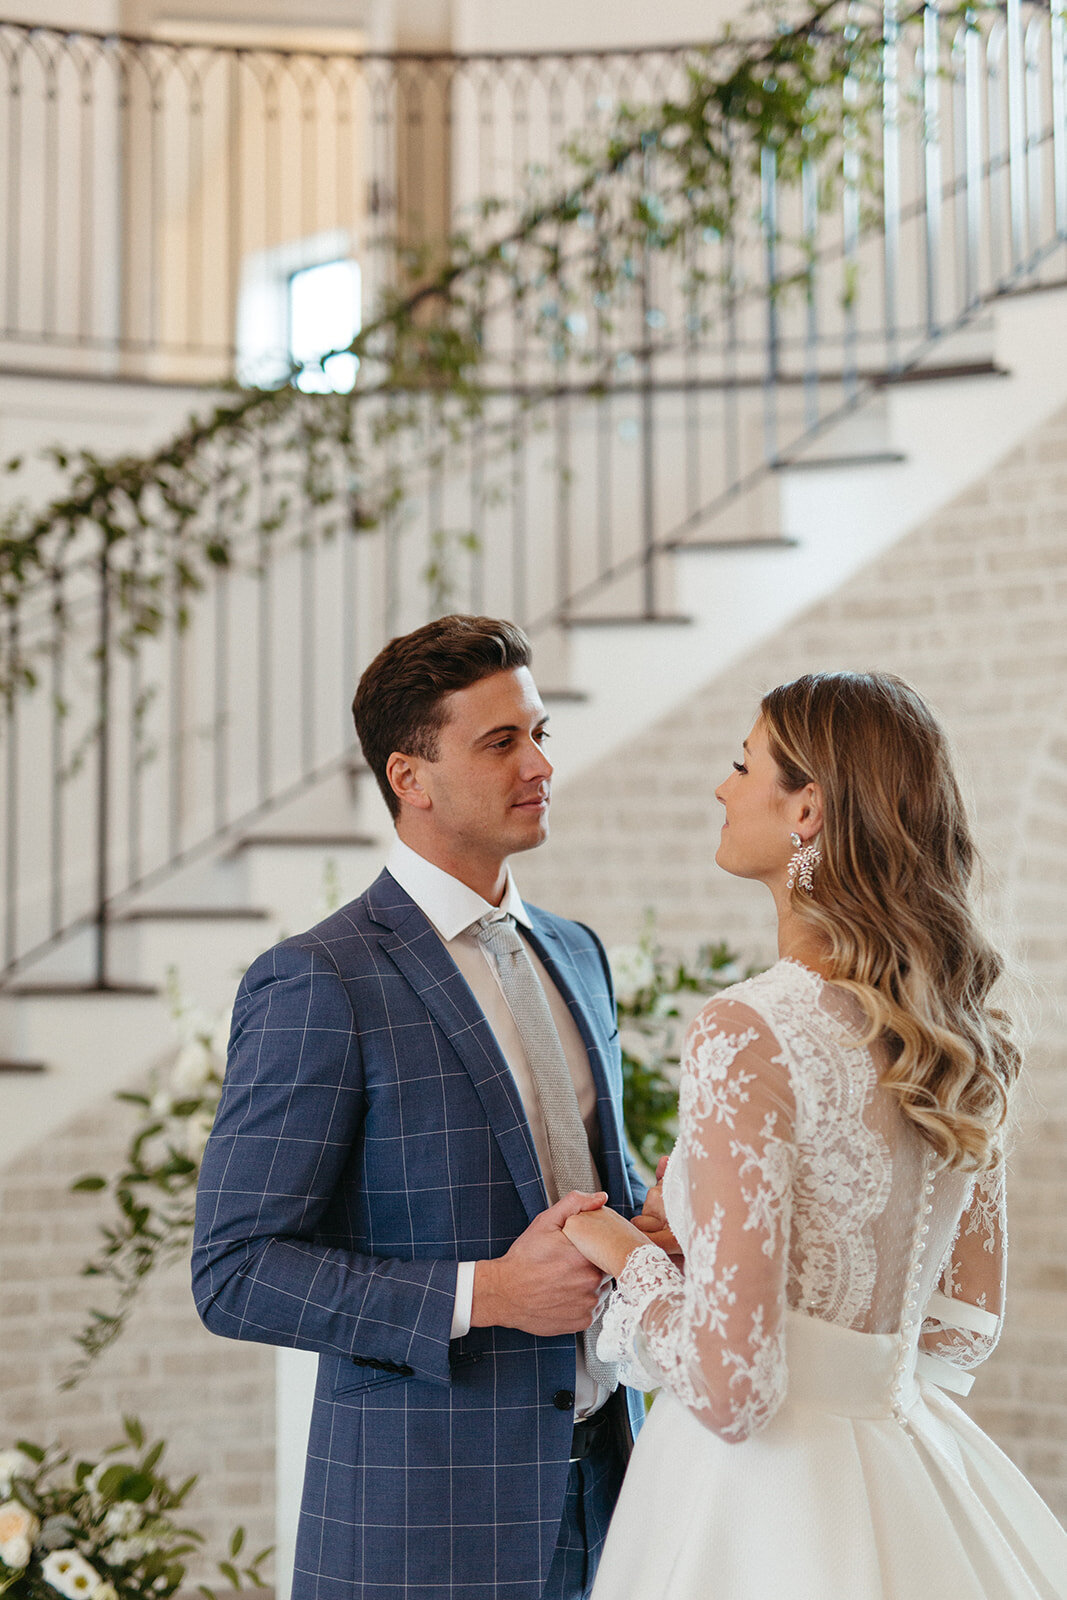 Bride and groom in a blue suit and white wedding gown holding hands by a staircase wrapped in garland.